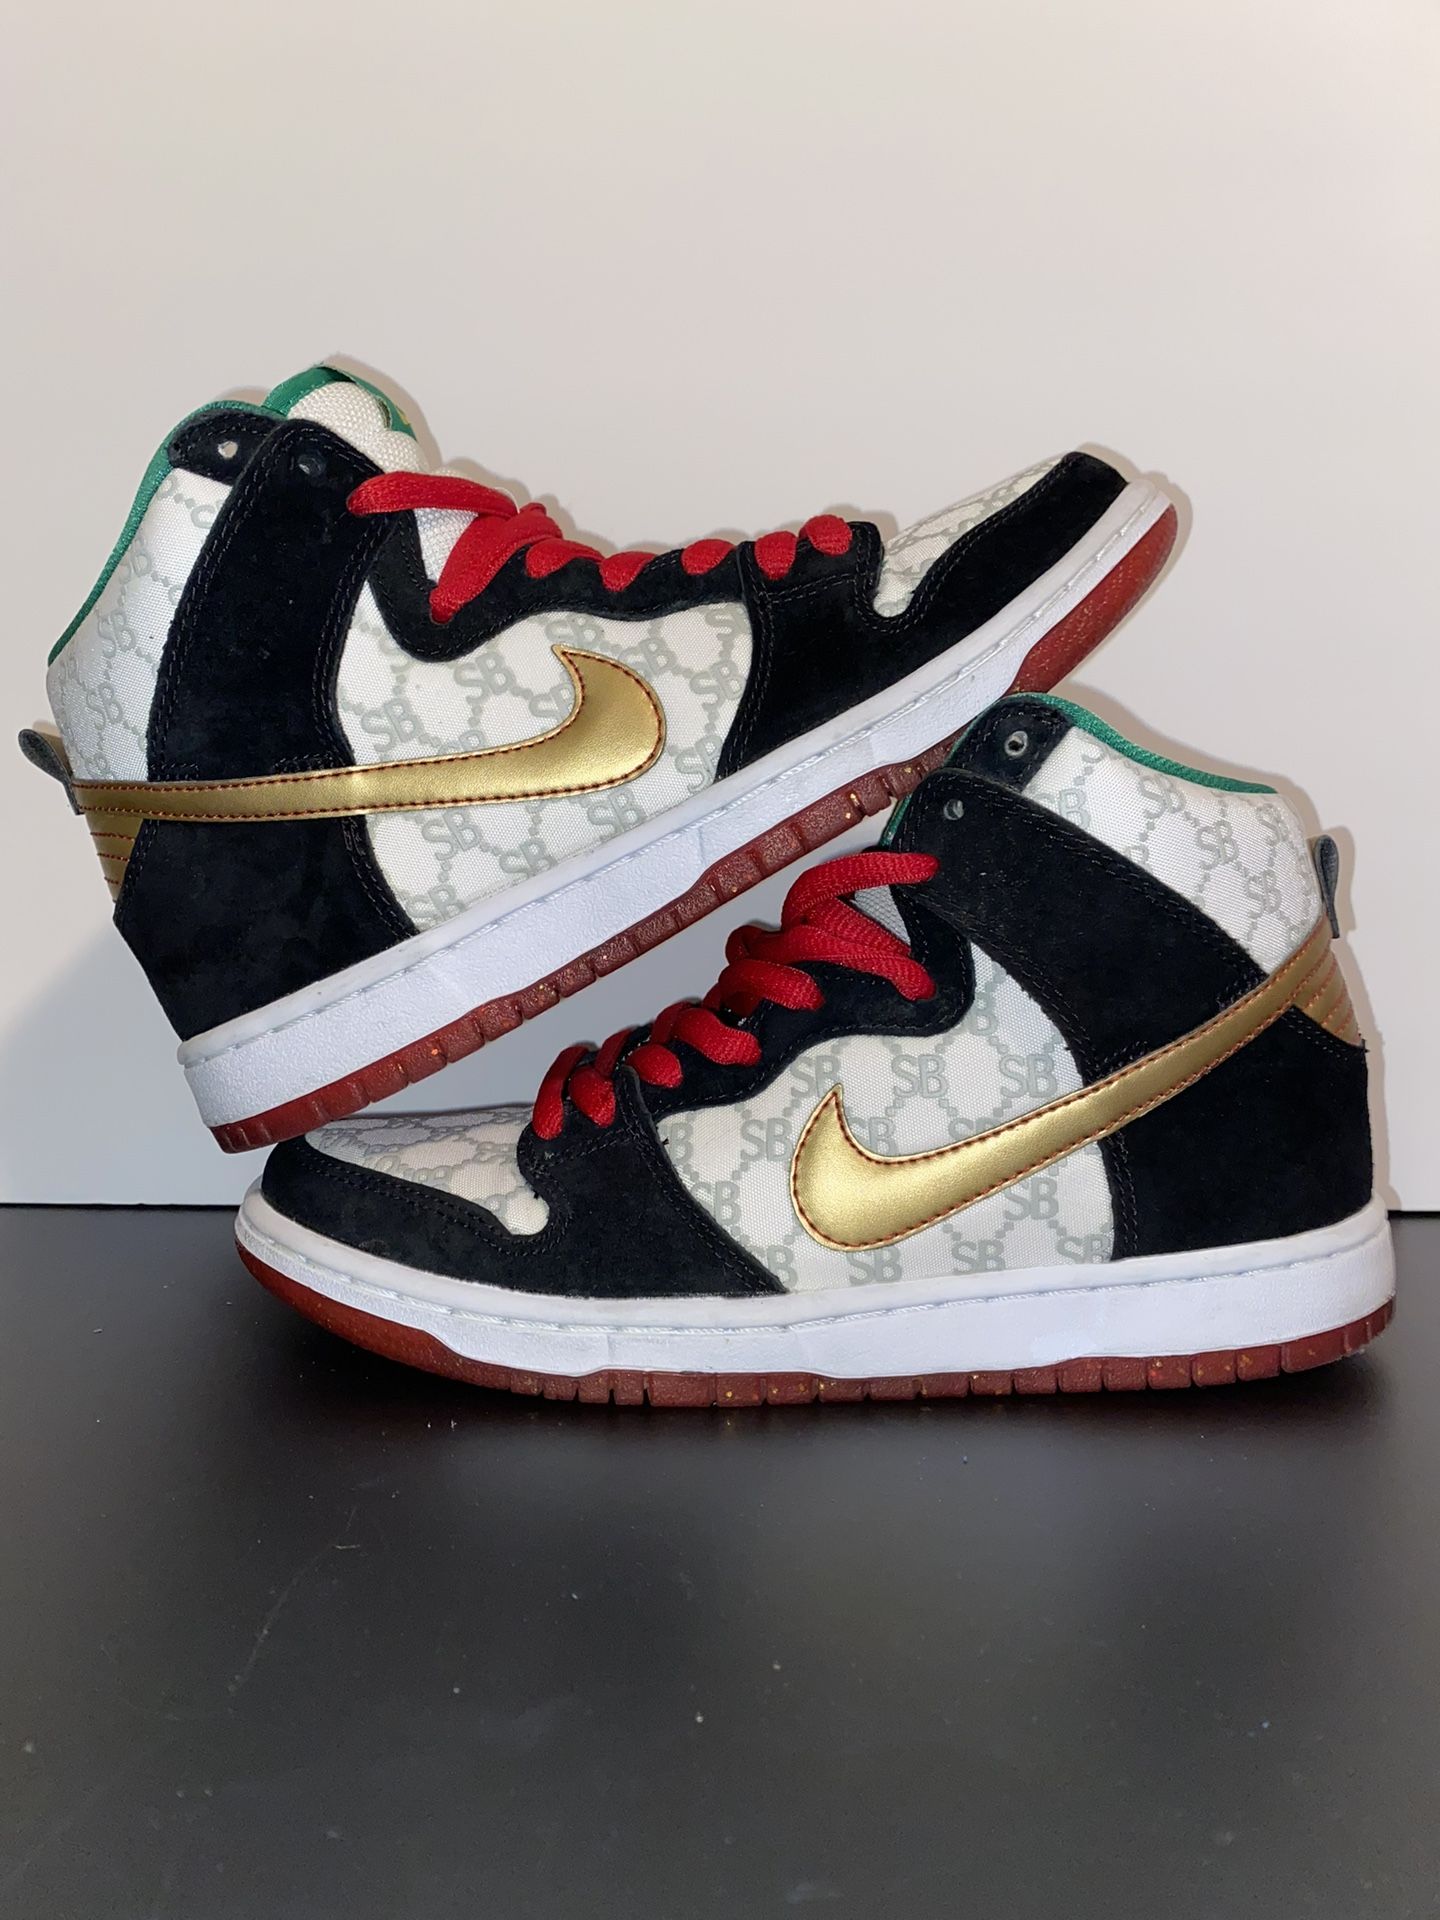 Frons stam Herziening Nike SB Dunk High Gucci Black Sheep Size 6.5 for Sale in Miami, FL - OfferUp